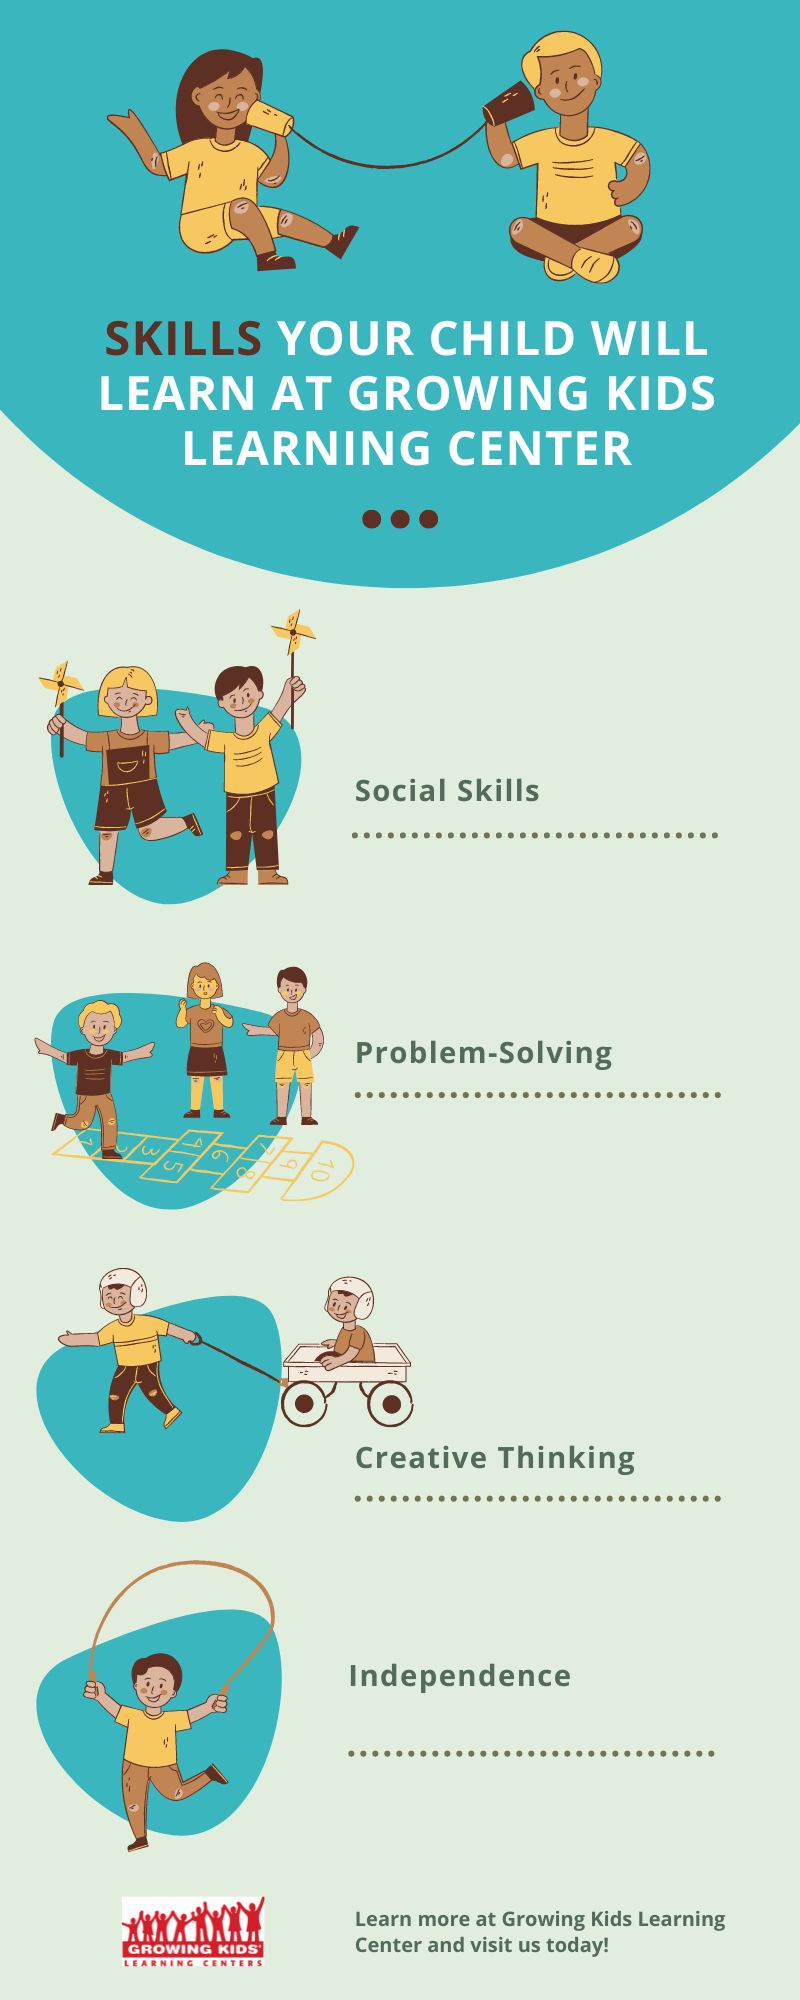 Skills Your Child Will Learn at Growing Kids Learning Center